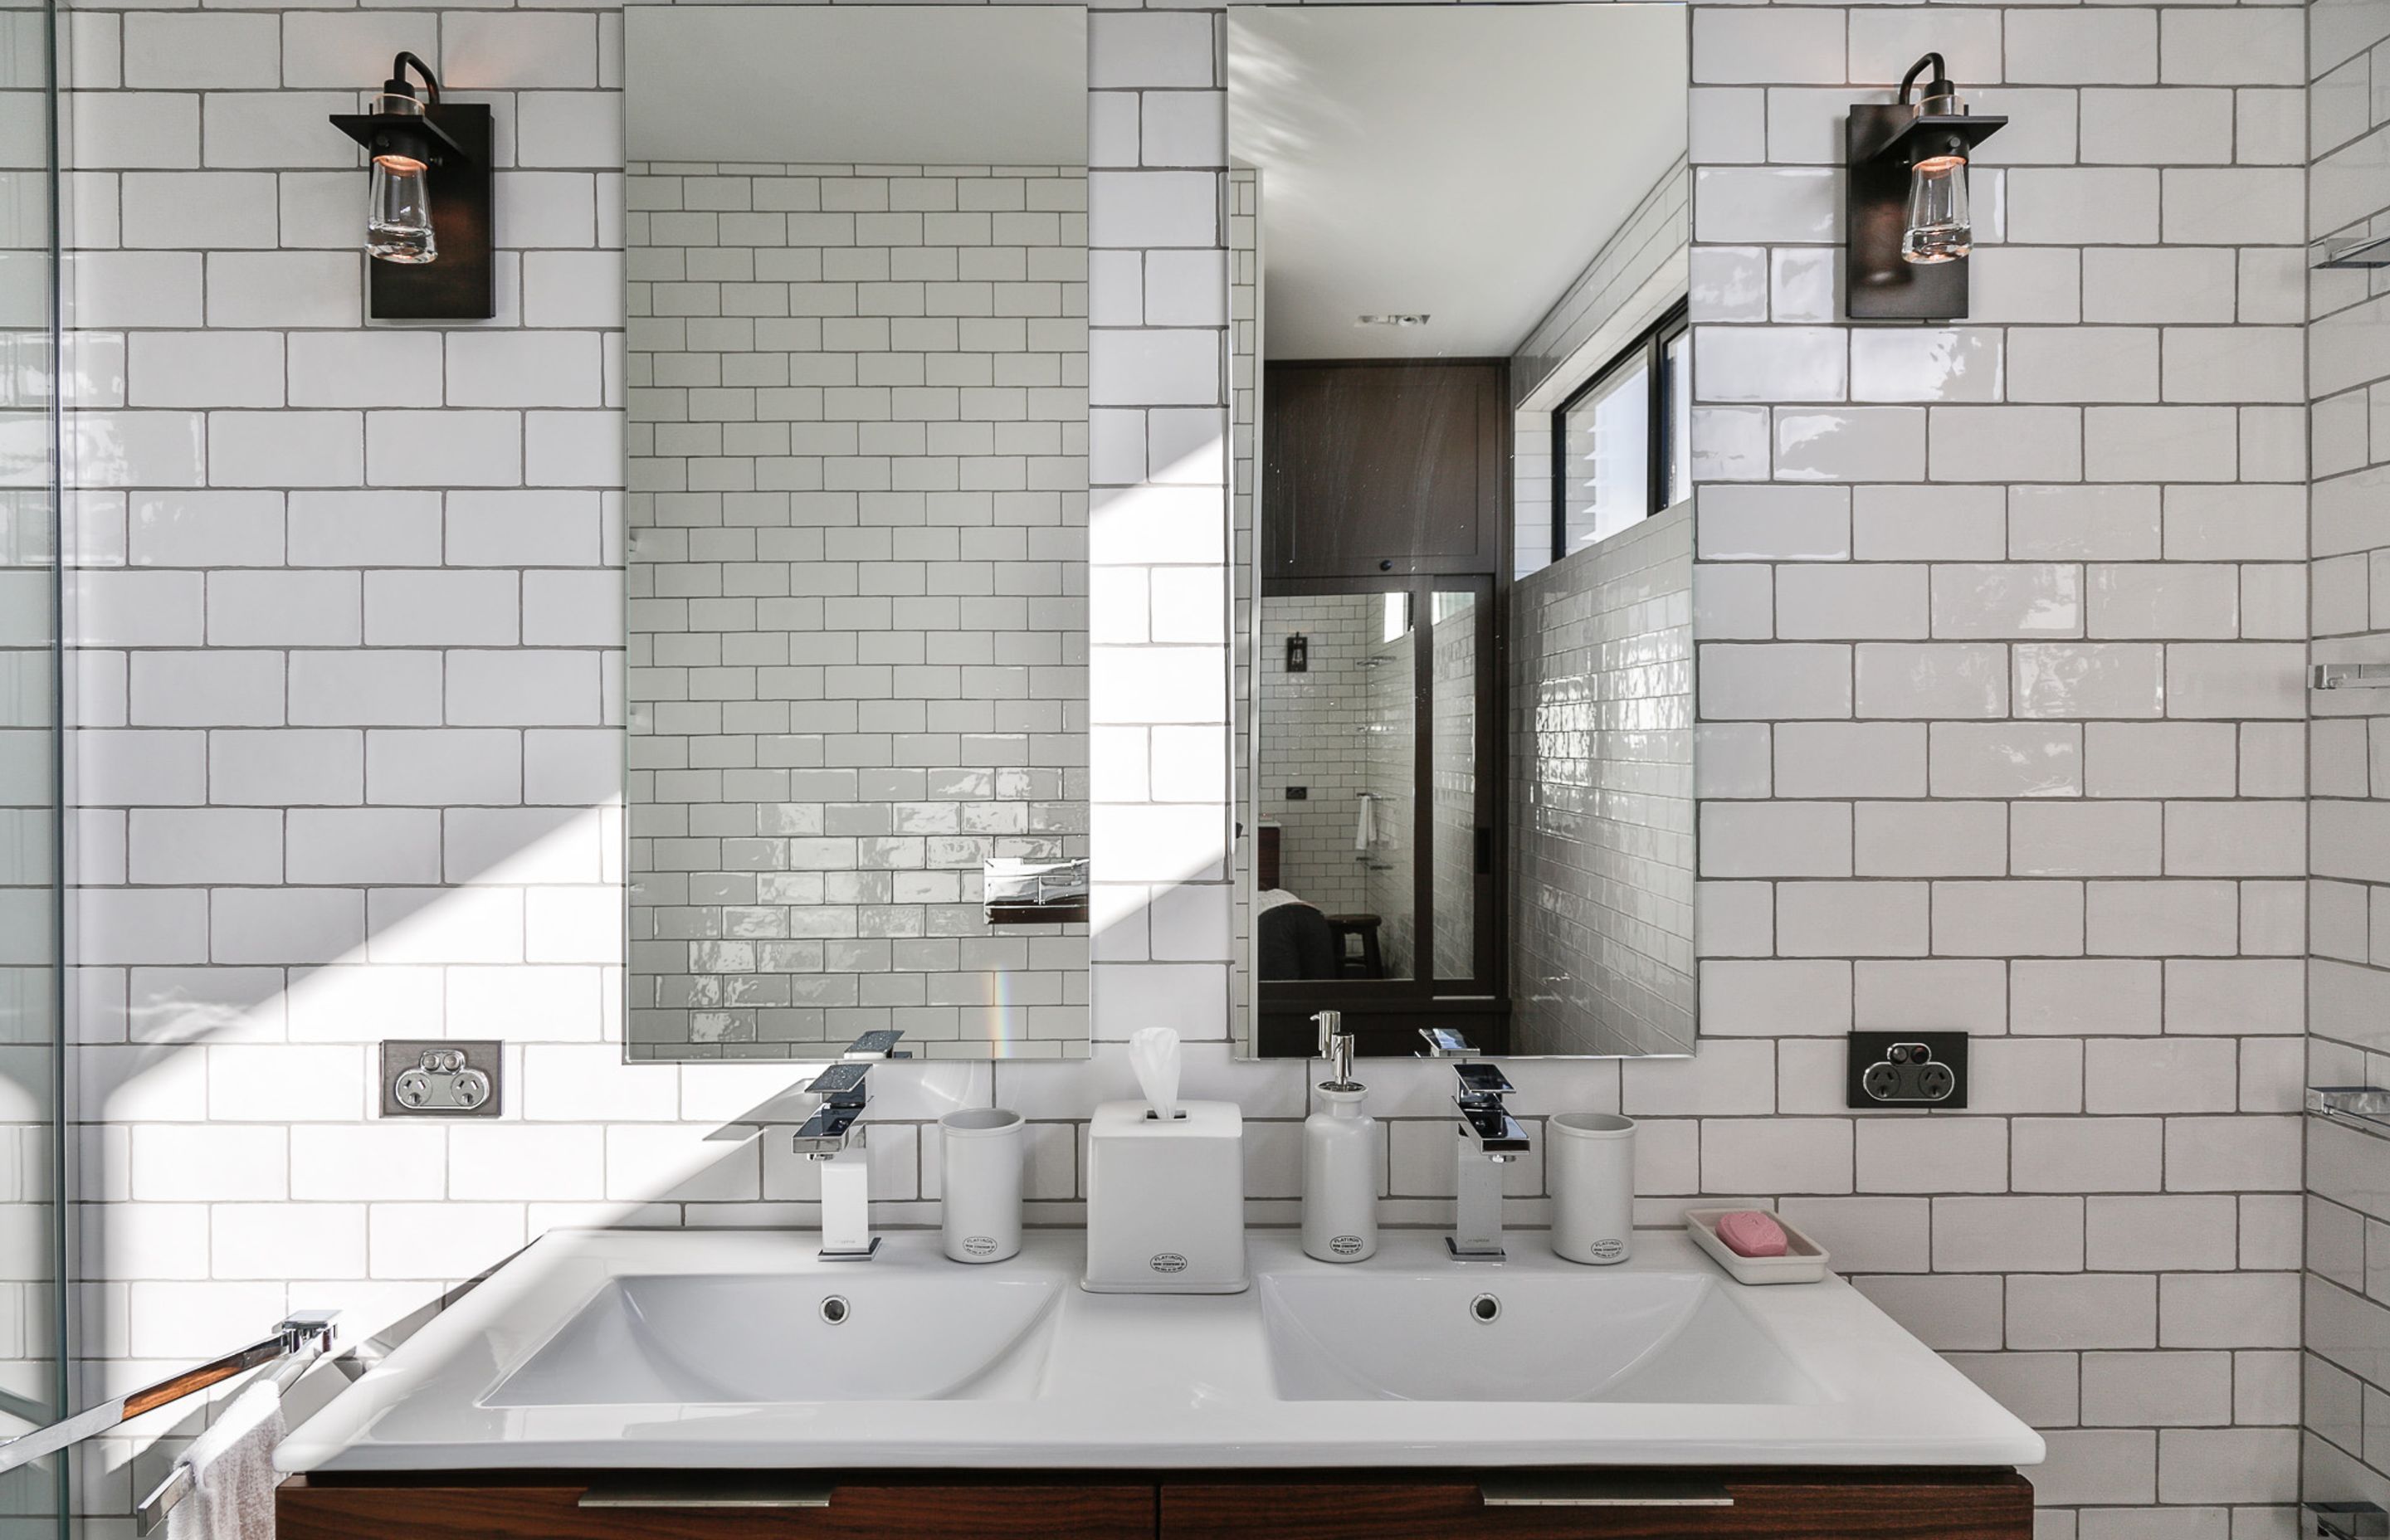 Floor-to-ceiling subway tiles in the guest bathroom are a nod to one of the owners' American heritage.